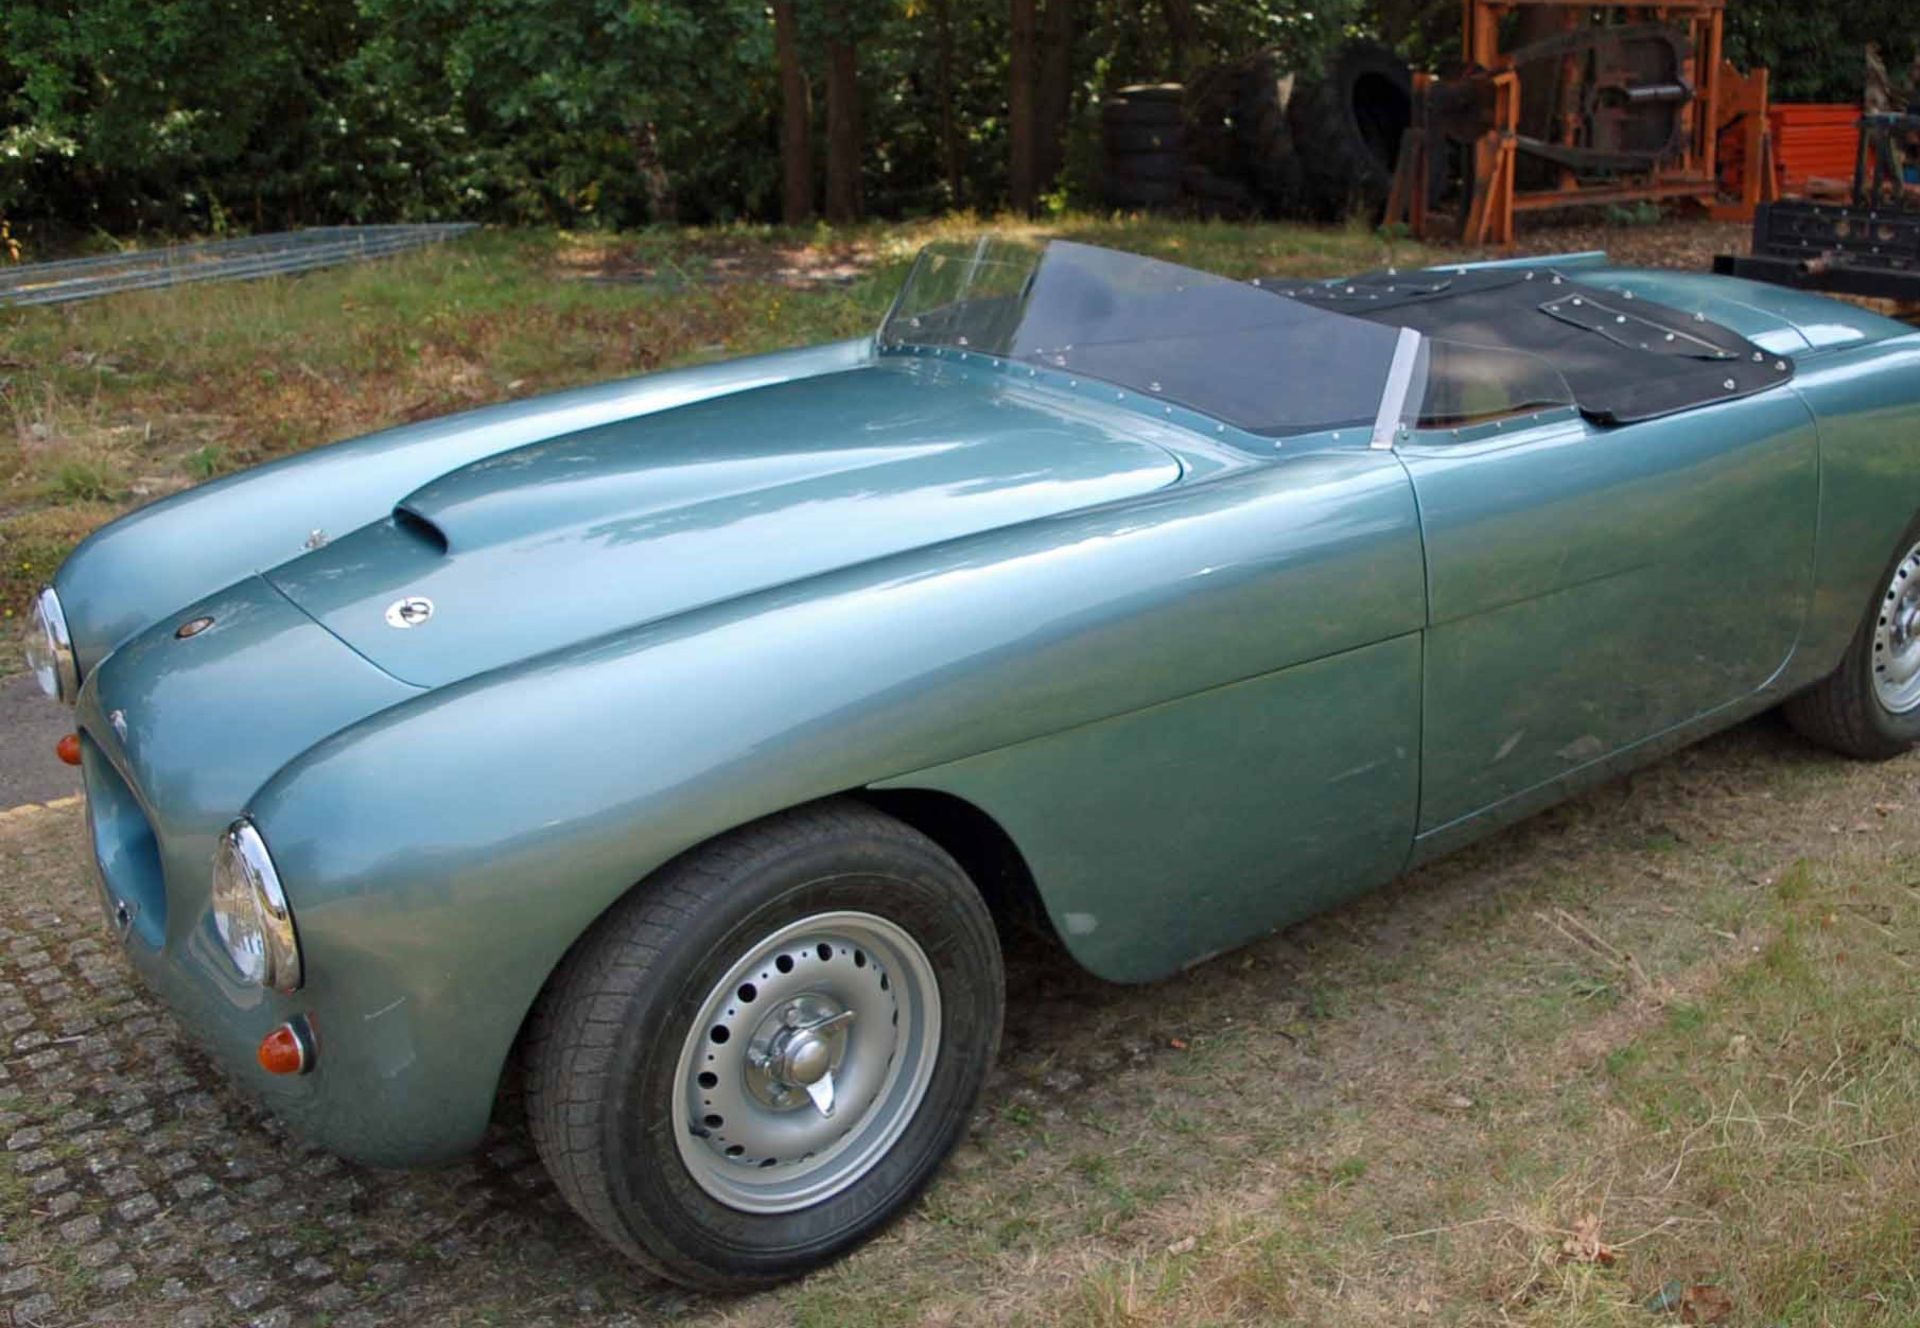 The 1964 Bristol 409 Bullet Speedster. The original Bullet, this car started life as a Bristol 409 - Image 4 of 17